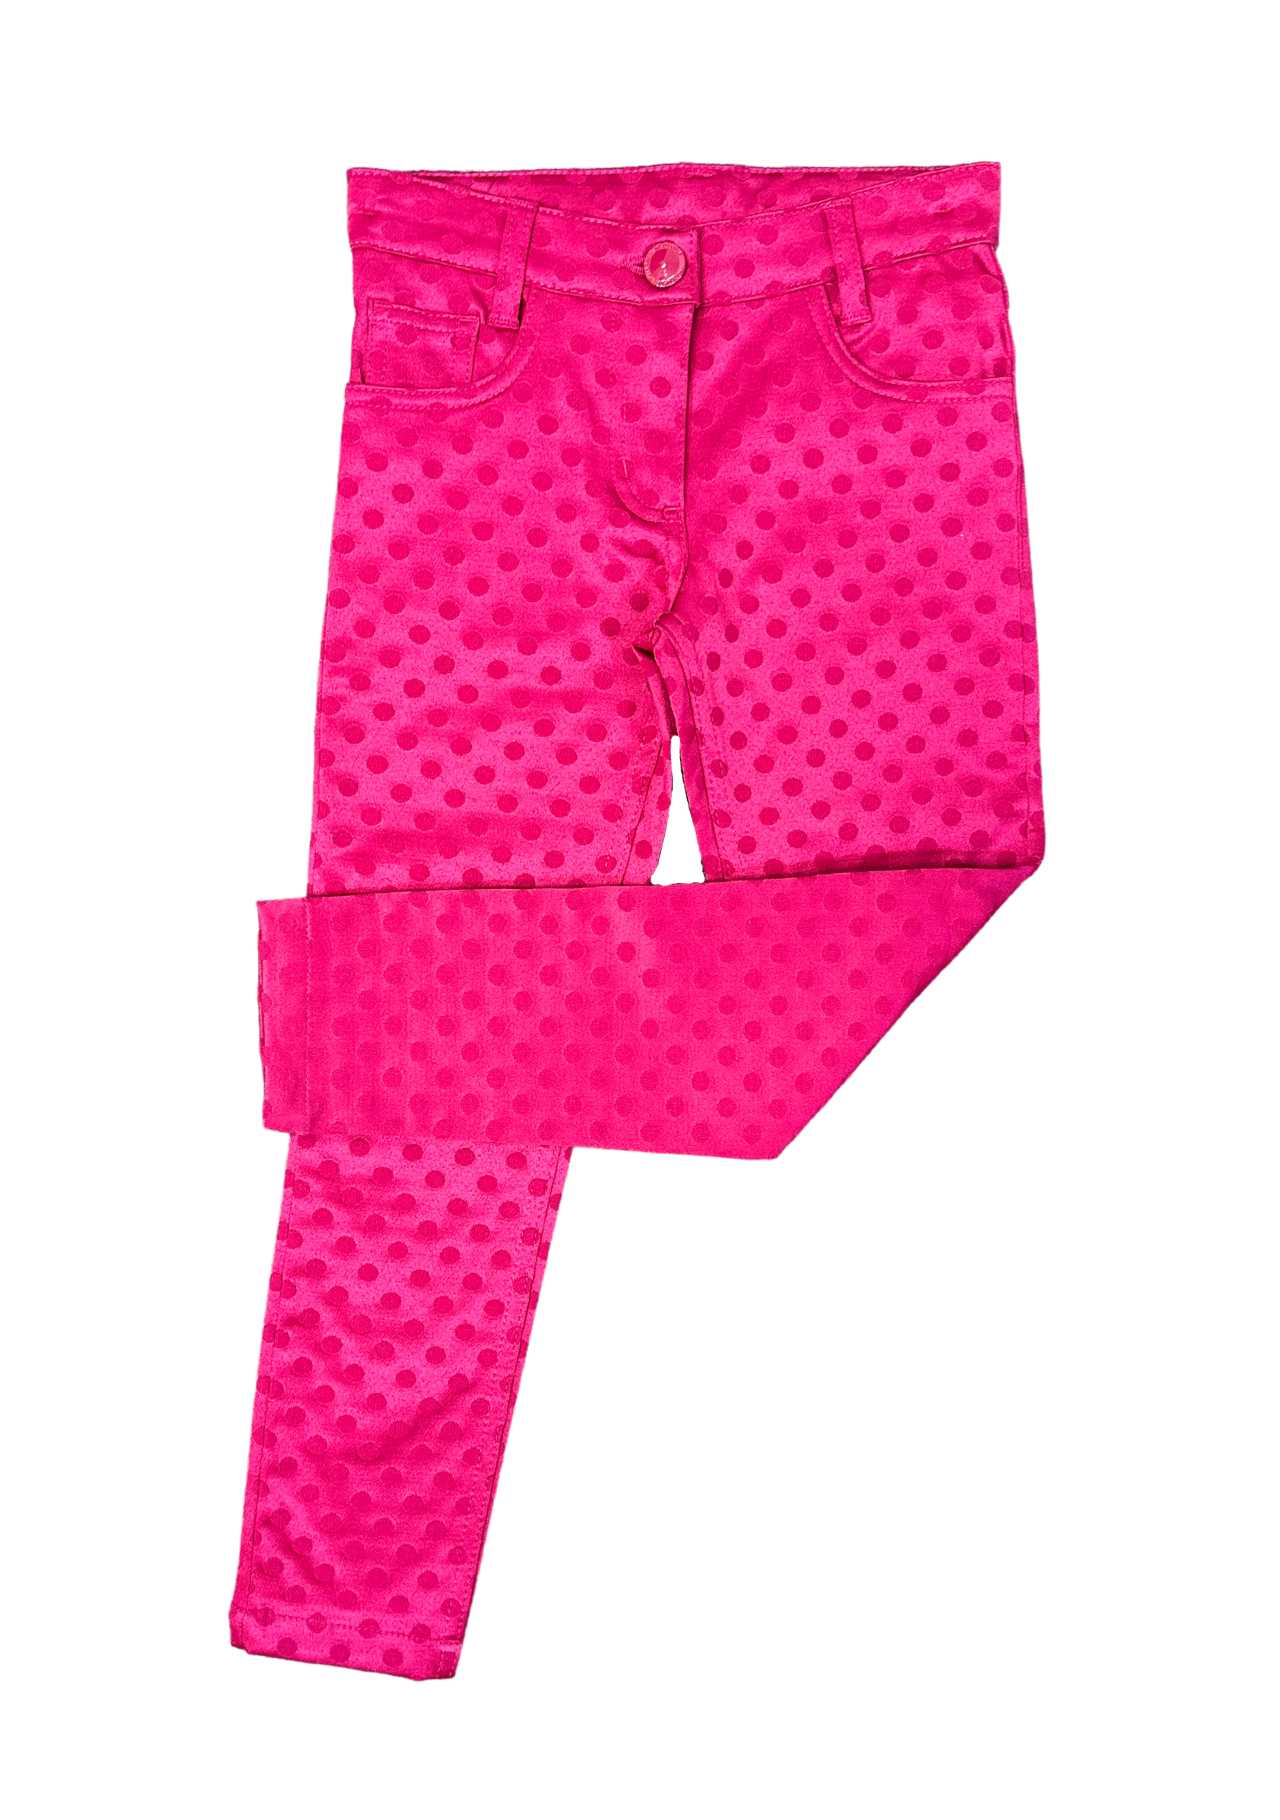 Essentials Leggings Solid Pink Girls Size XL 12 Pull On Pants NWOT